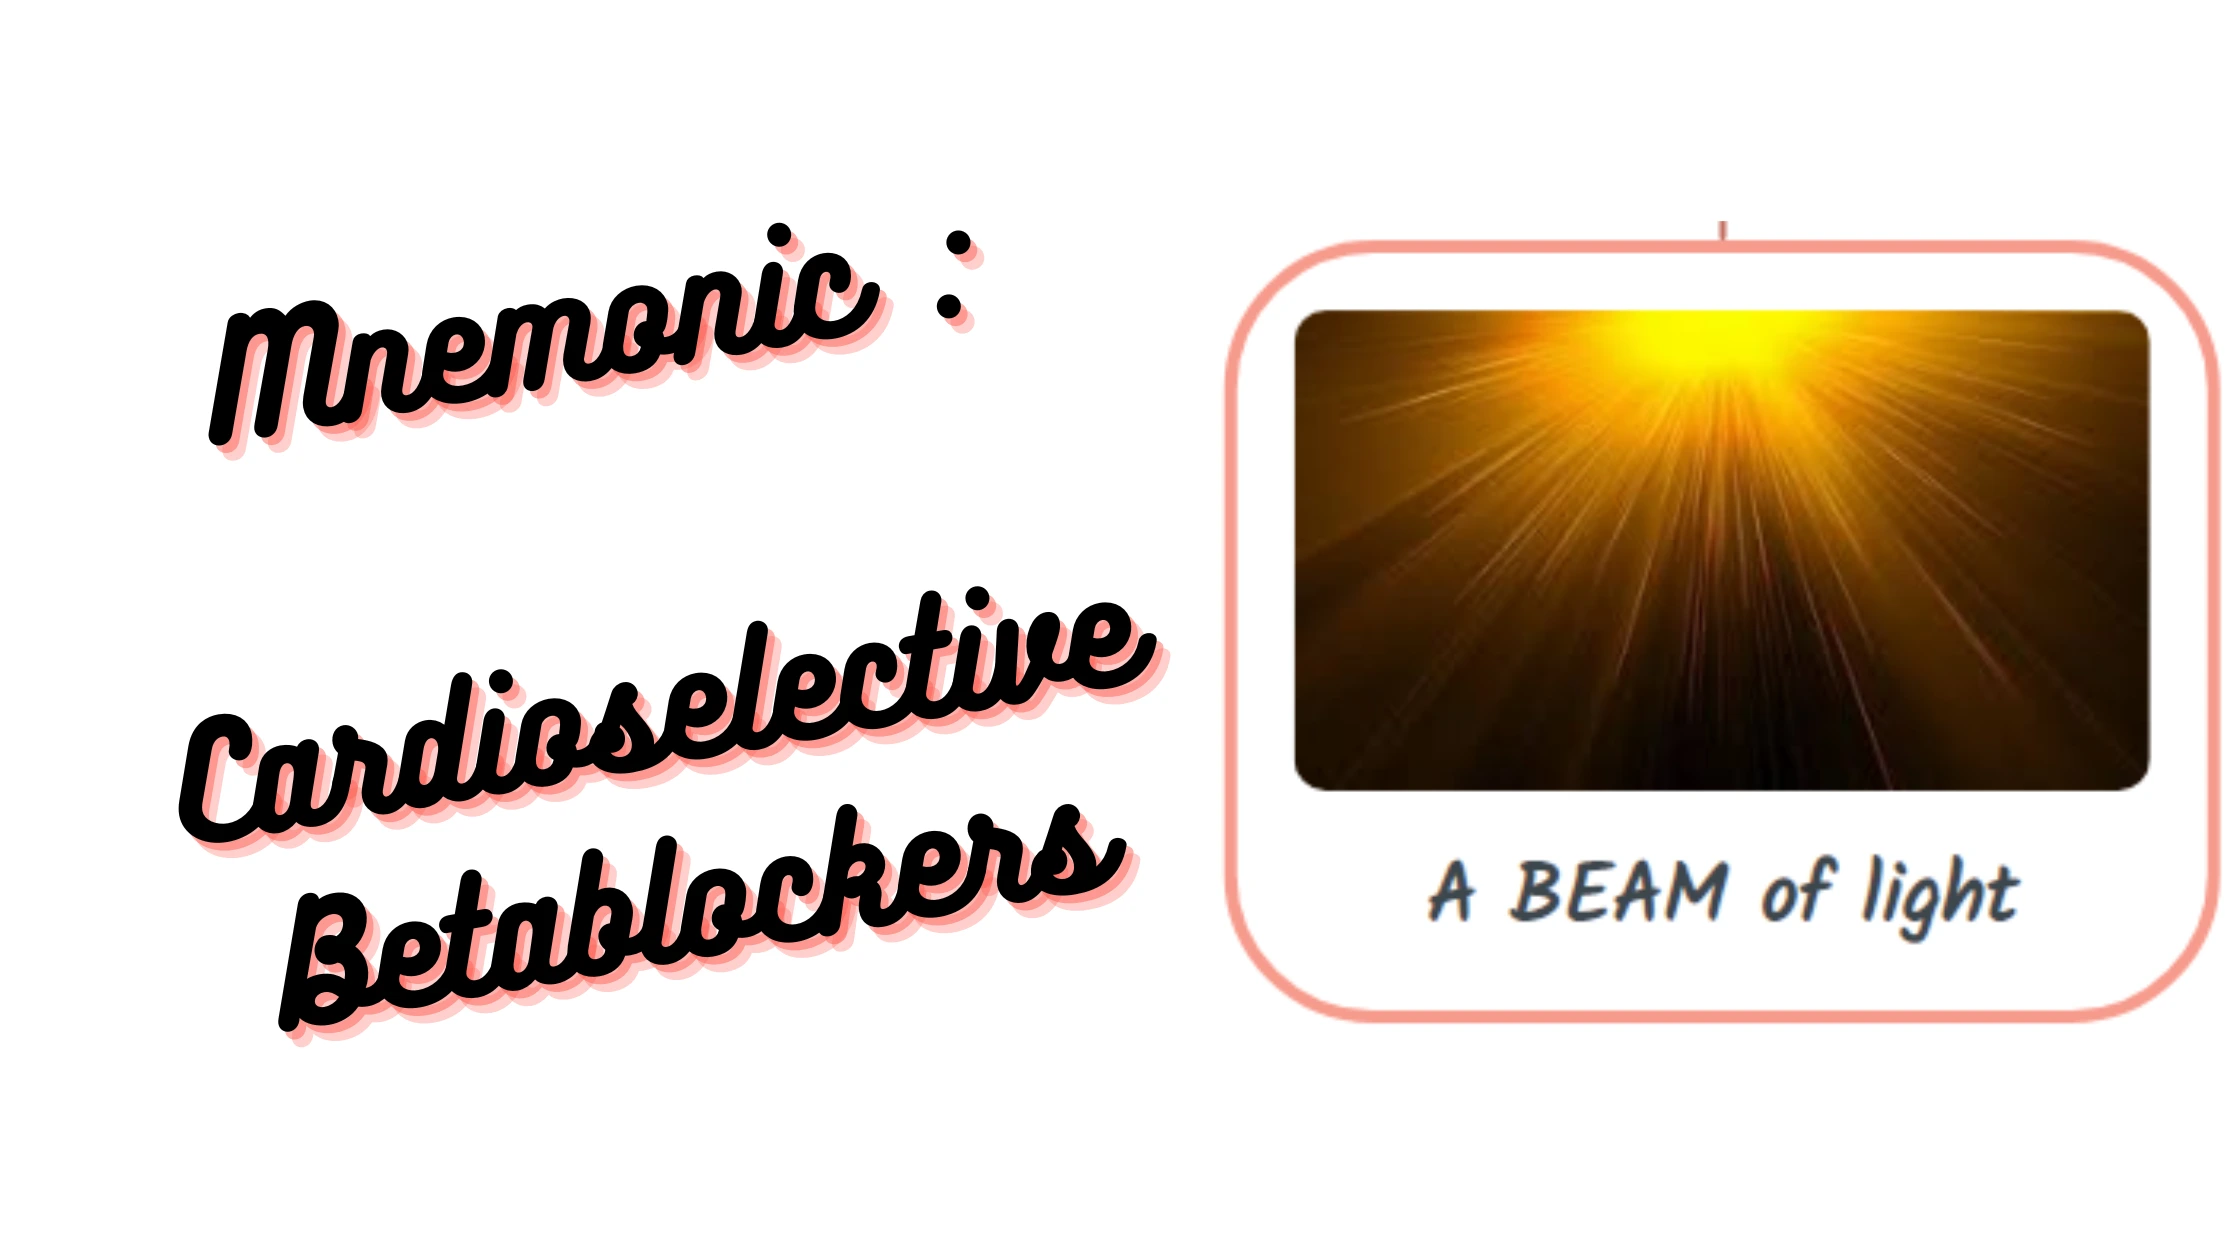 You are currently viewing Mnemonic : Cardioselective Betablockers